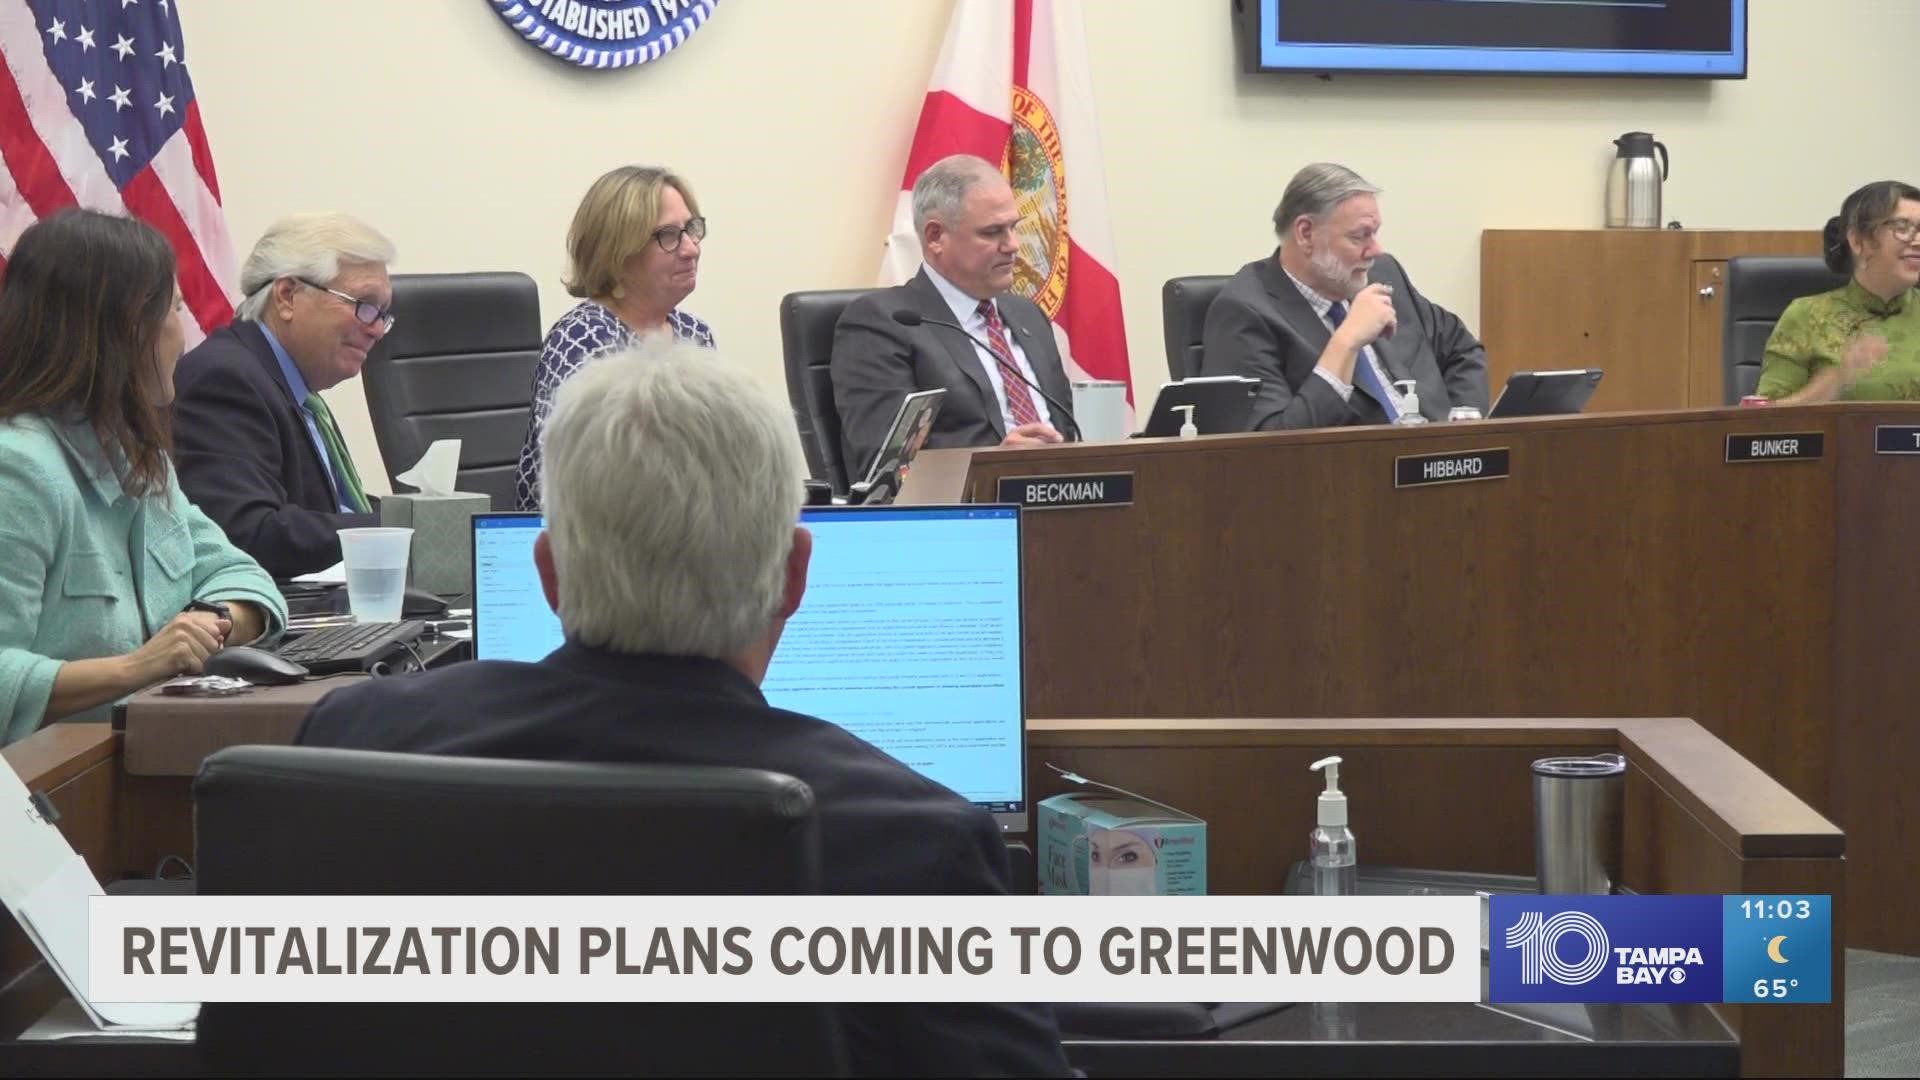 Councilmembers voted to approve a plan for the revitalization of the Greenwood neighborhood.